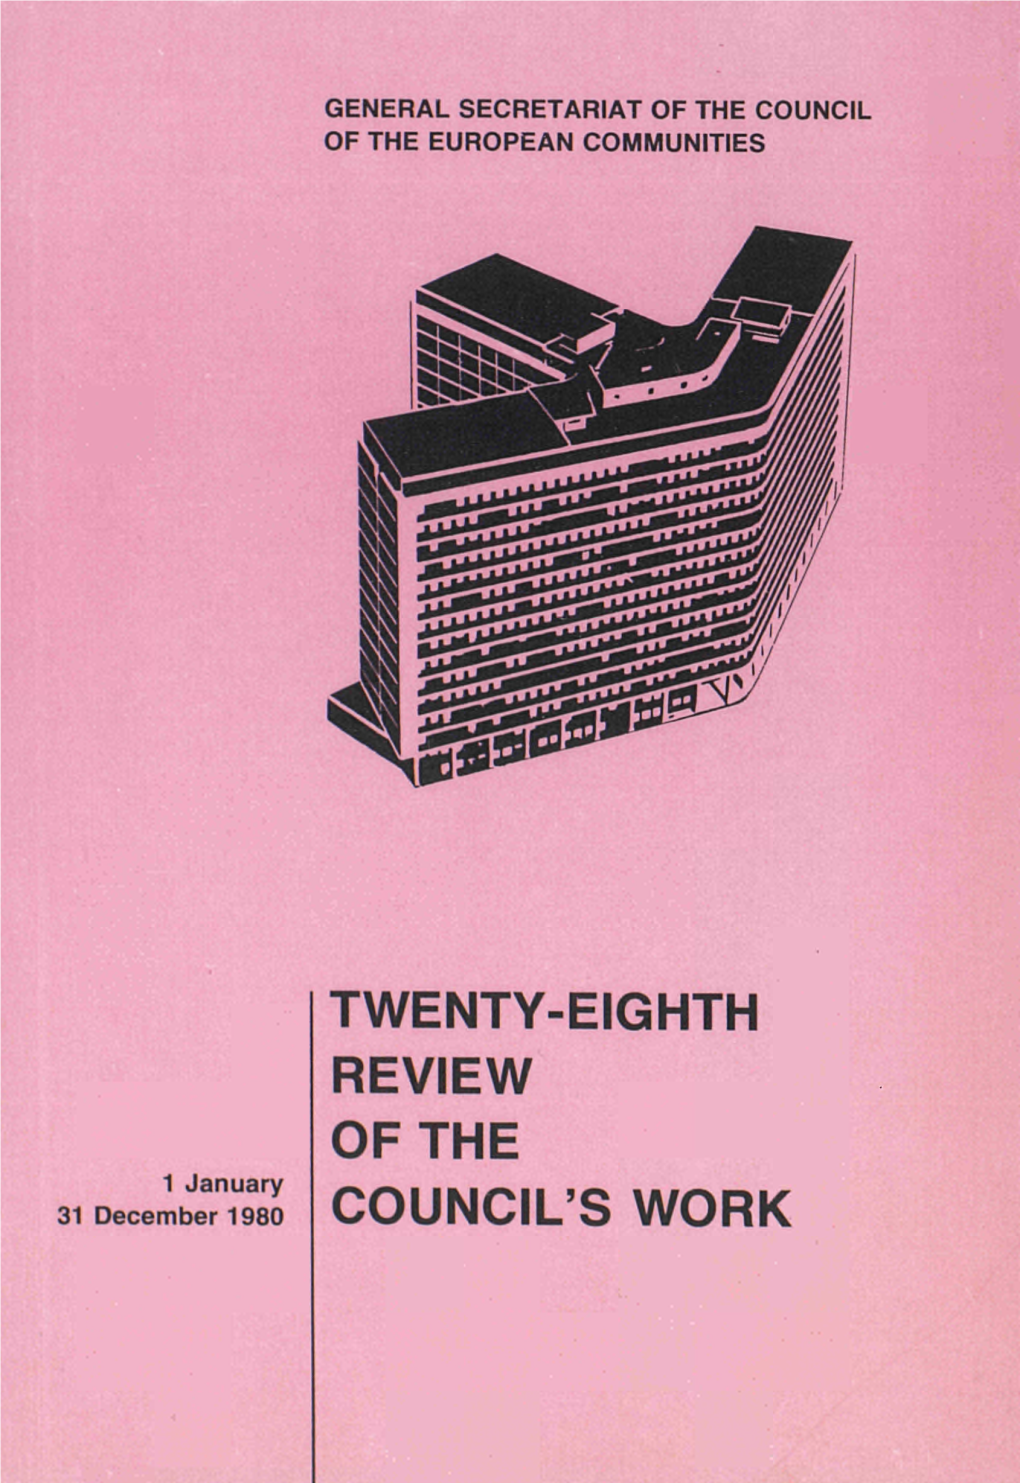 Twenty-Eighth Review of the Council's Work 1 January - 31 December 1980